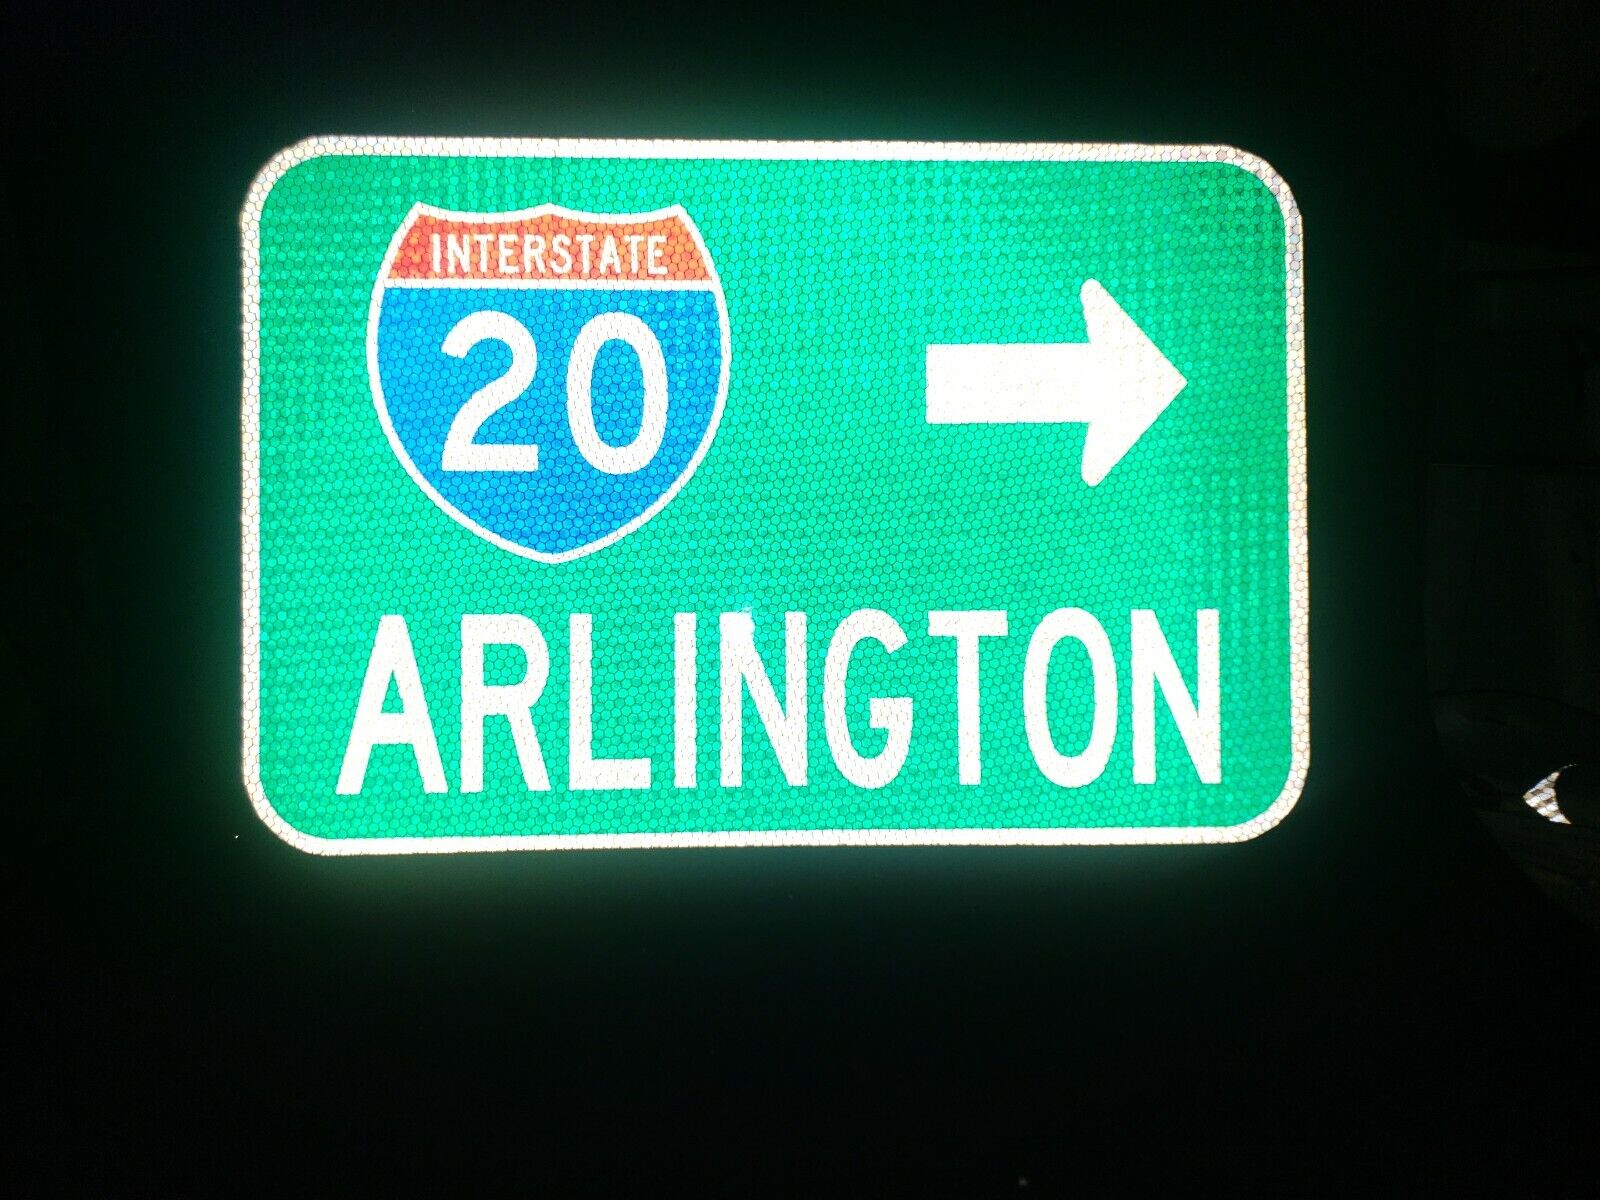 ARLINGTON Interstate 20 route road sign - Texas DOT, Dallas / Fort Worth